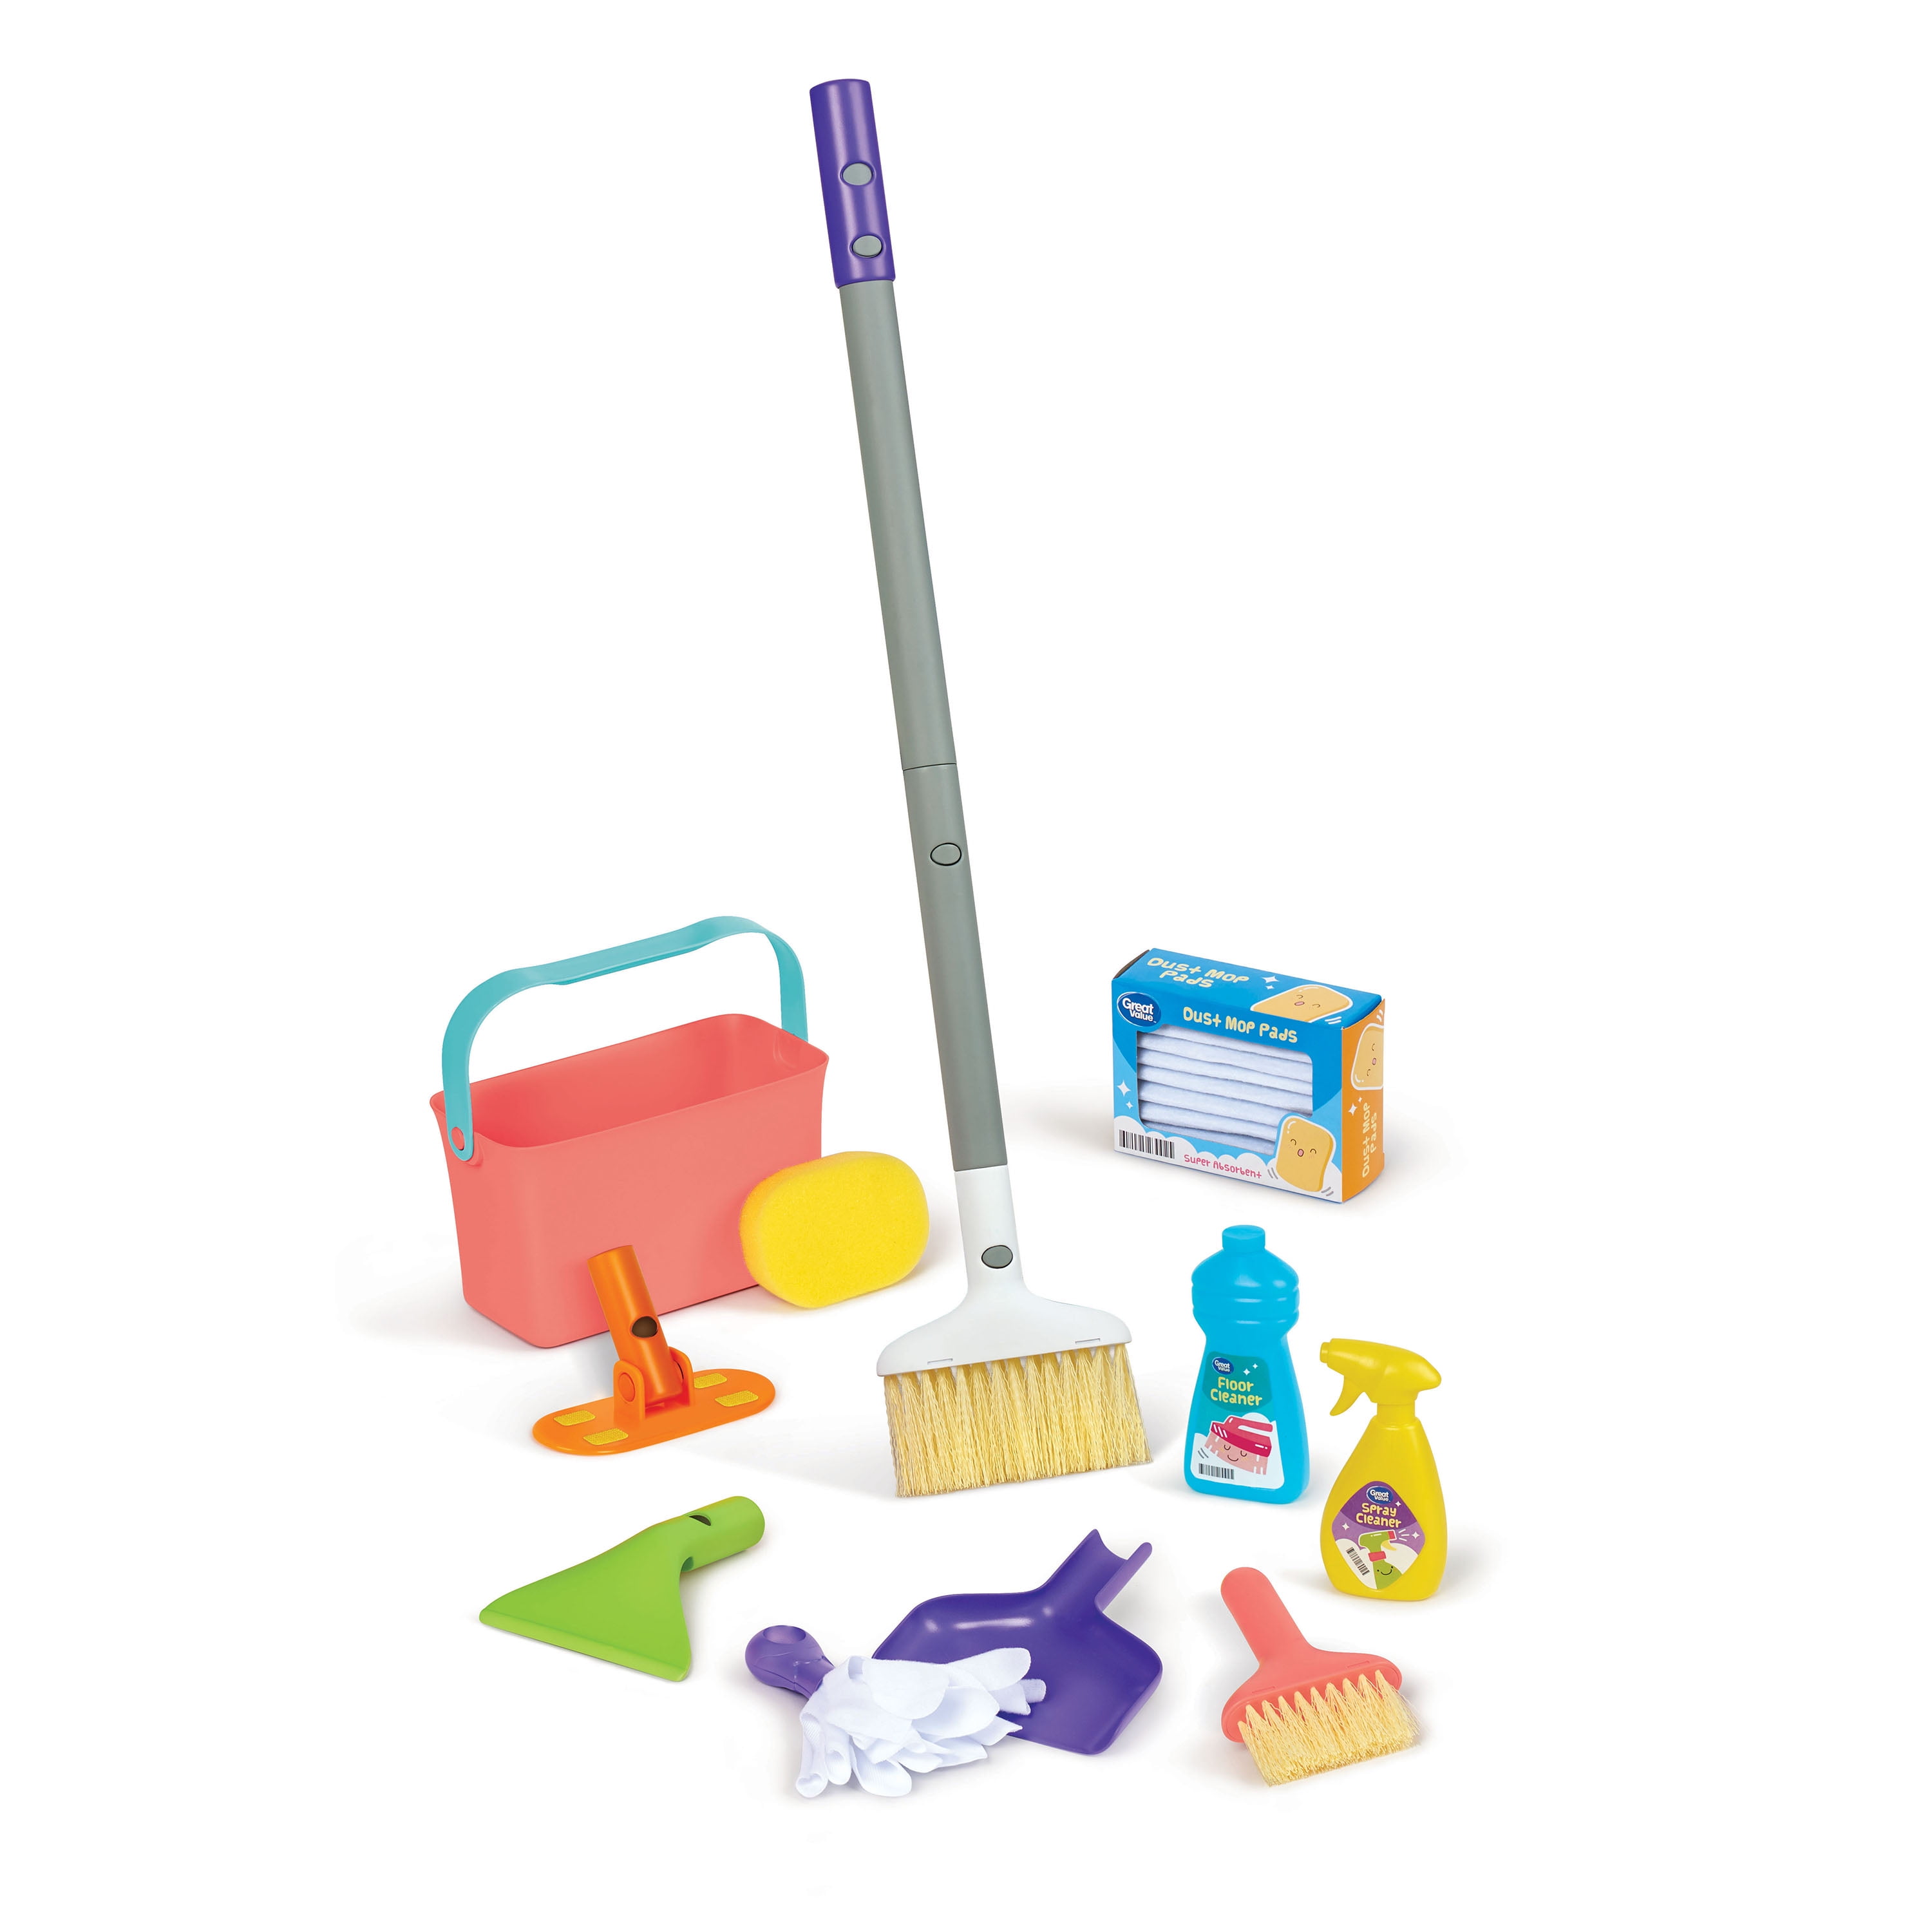 Spark Create Imagine Toddler Pretend Cleaning Play Set Broom MOP Bucket 3 for sale online